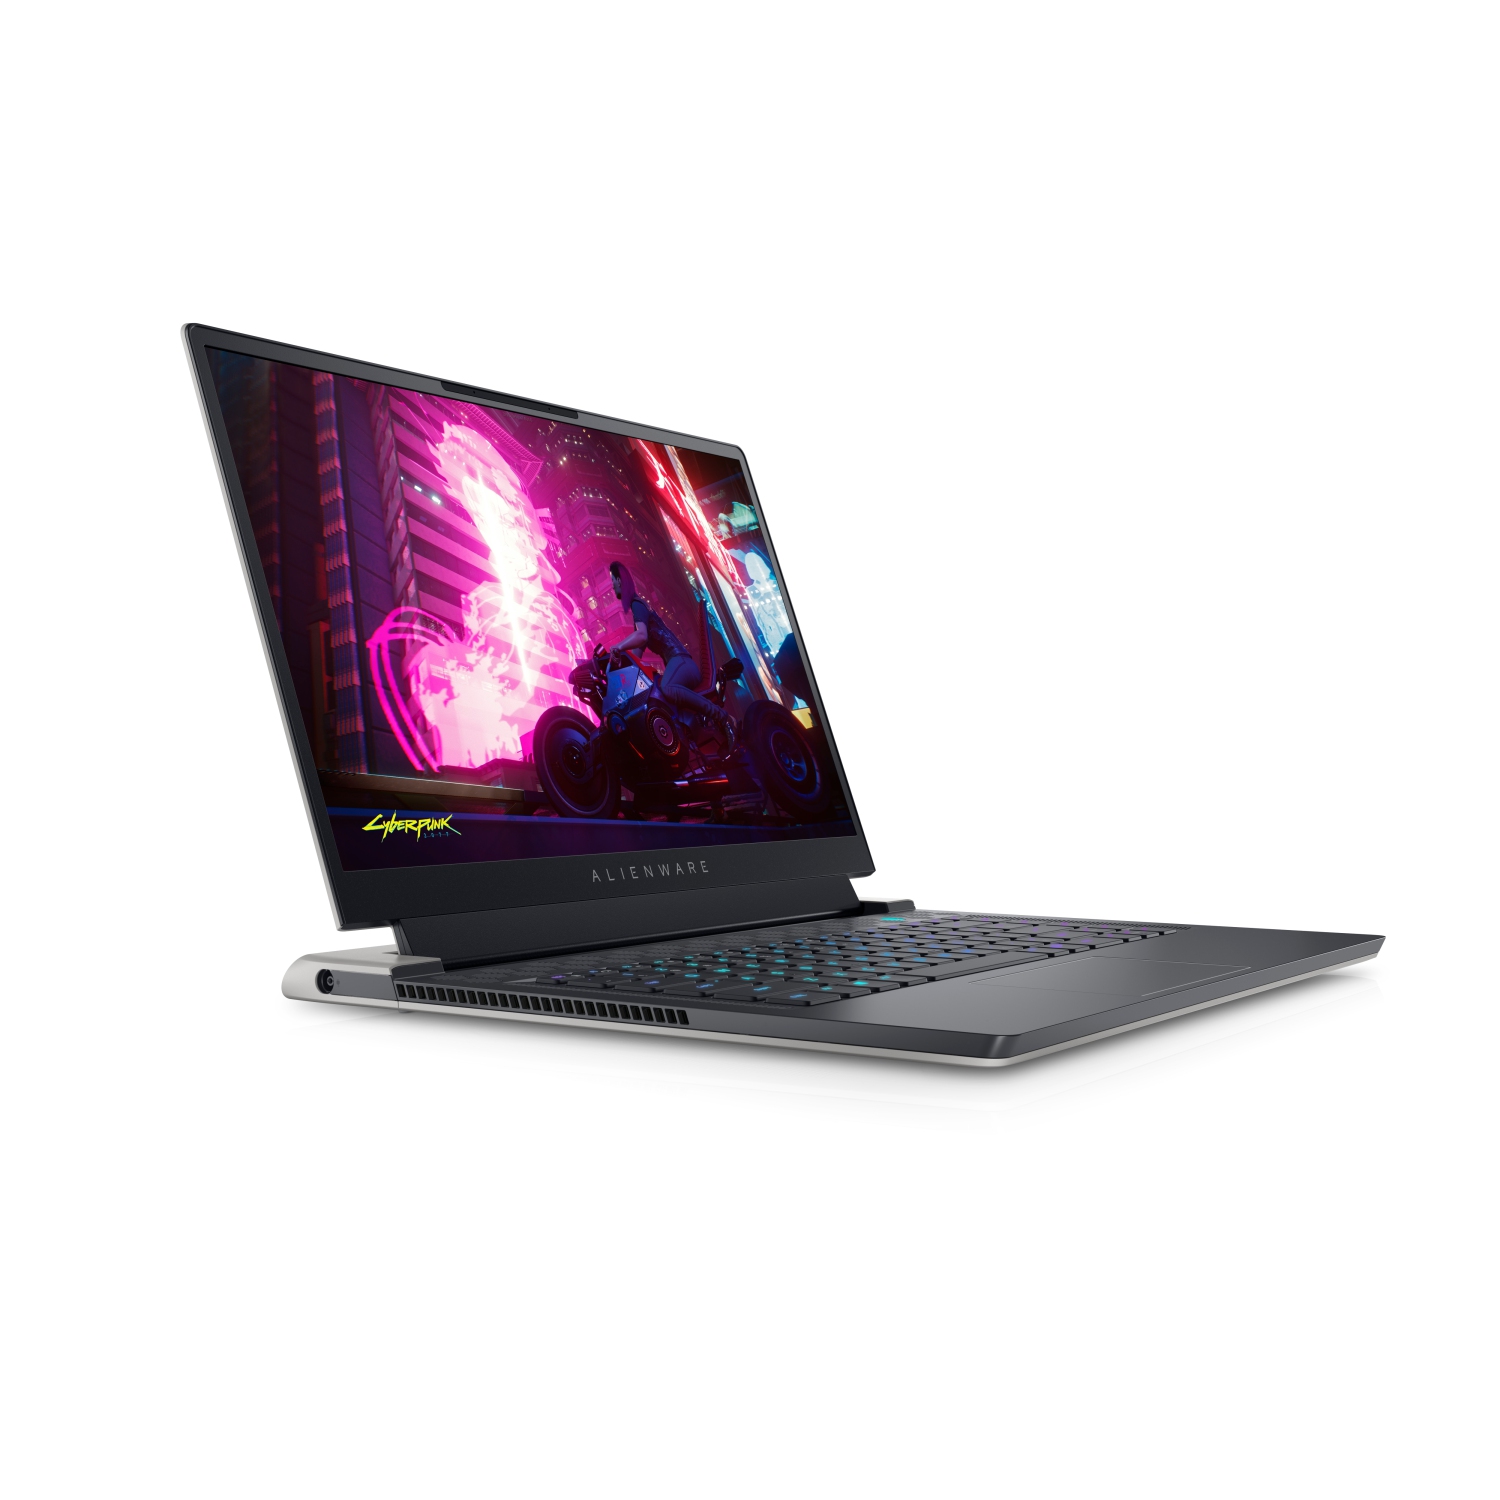 Refurbished (Excellent) - Dell Alienware X15 R1 Gaming Laptop (2021), 15.6" QHD, Core i7, 512GB SSD, 16GB RAM, RTX 3070, 8 Cores @ 4.6 GHz, 11th Gen CPU Certified